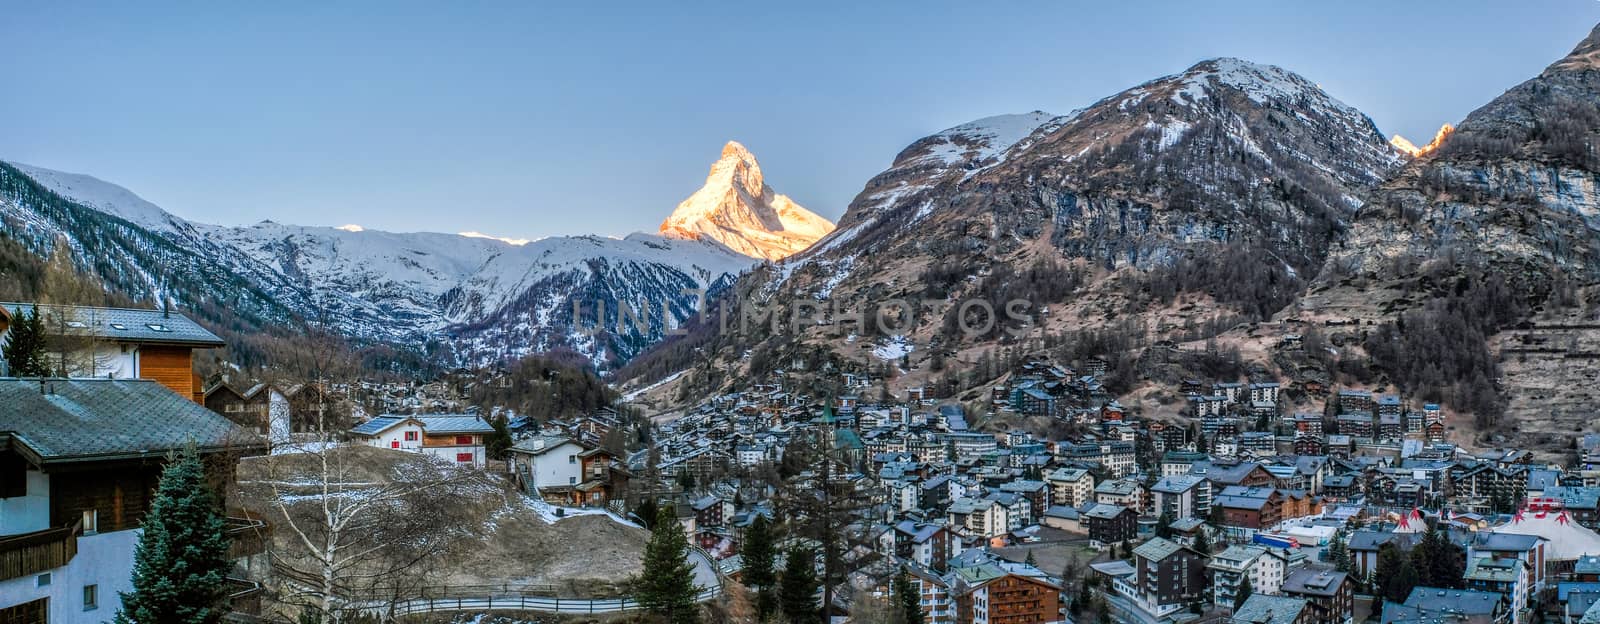 Beautiful view of old village in sunrise time with Matterhorn pe by Surasak